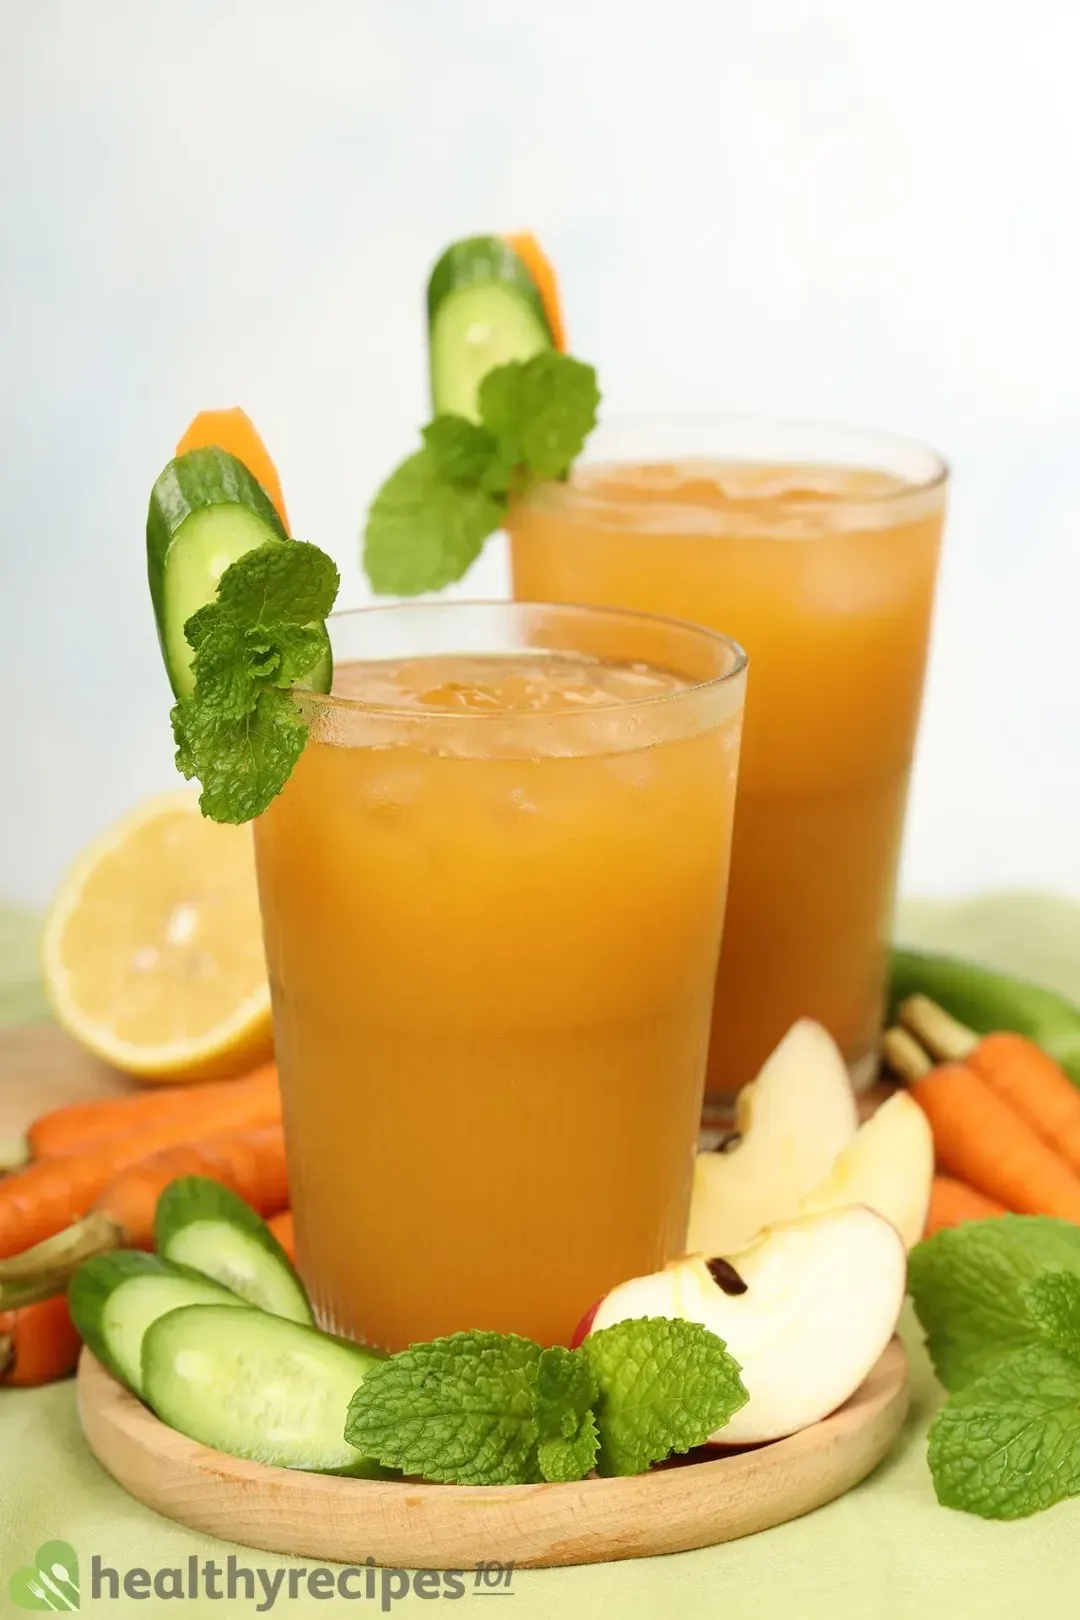 Two glasses of iced brown drink garnished with sliced cucumber, mint leaves, apple wedges, and baby carrots